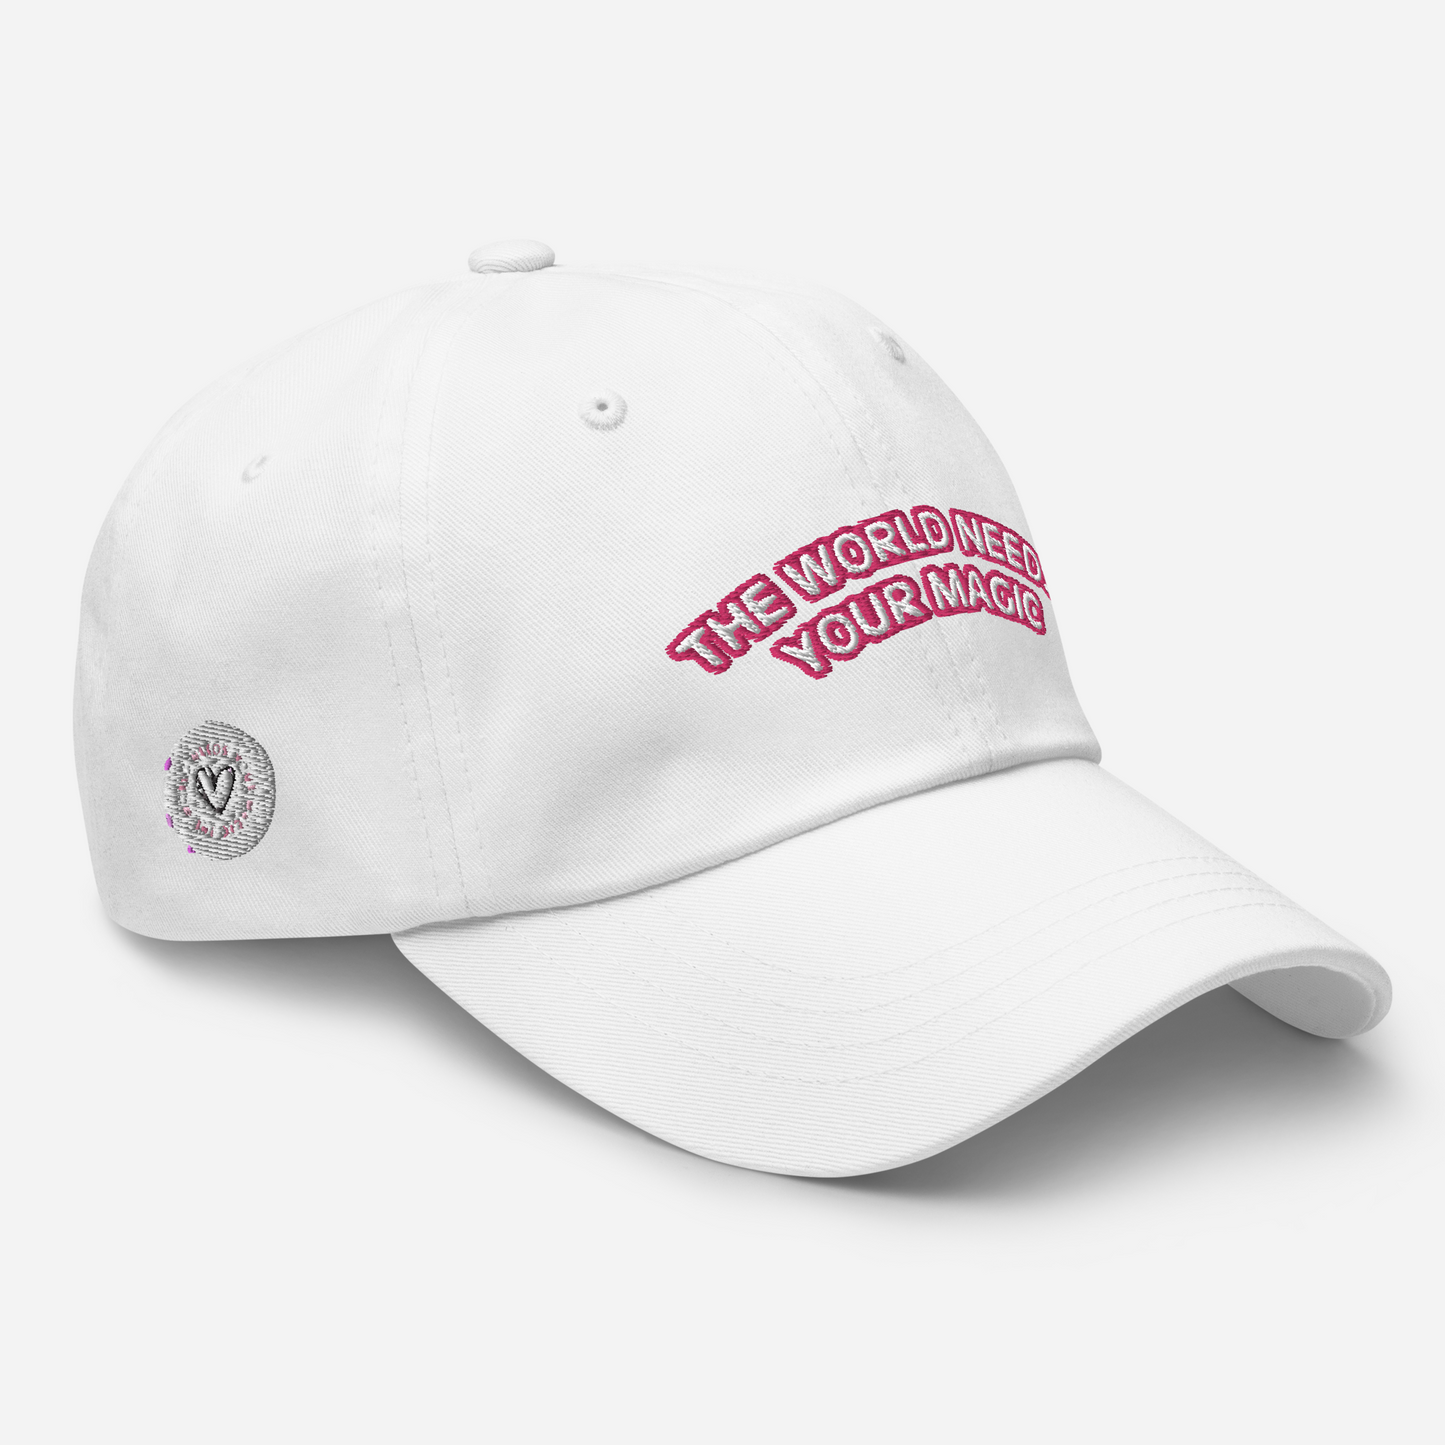 The World Needs Your Magic - Dad hat